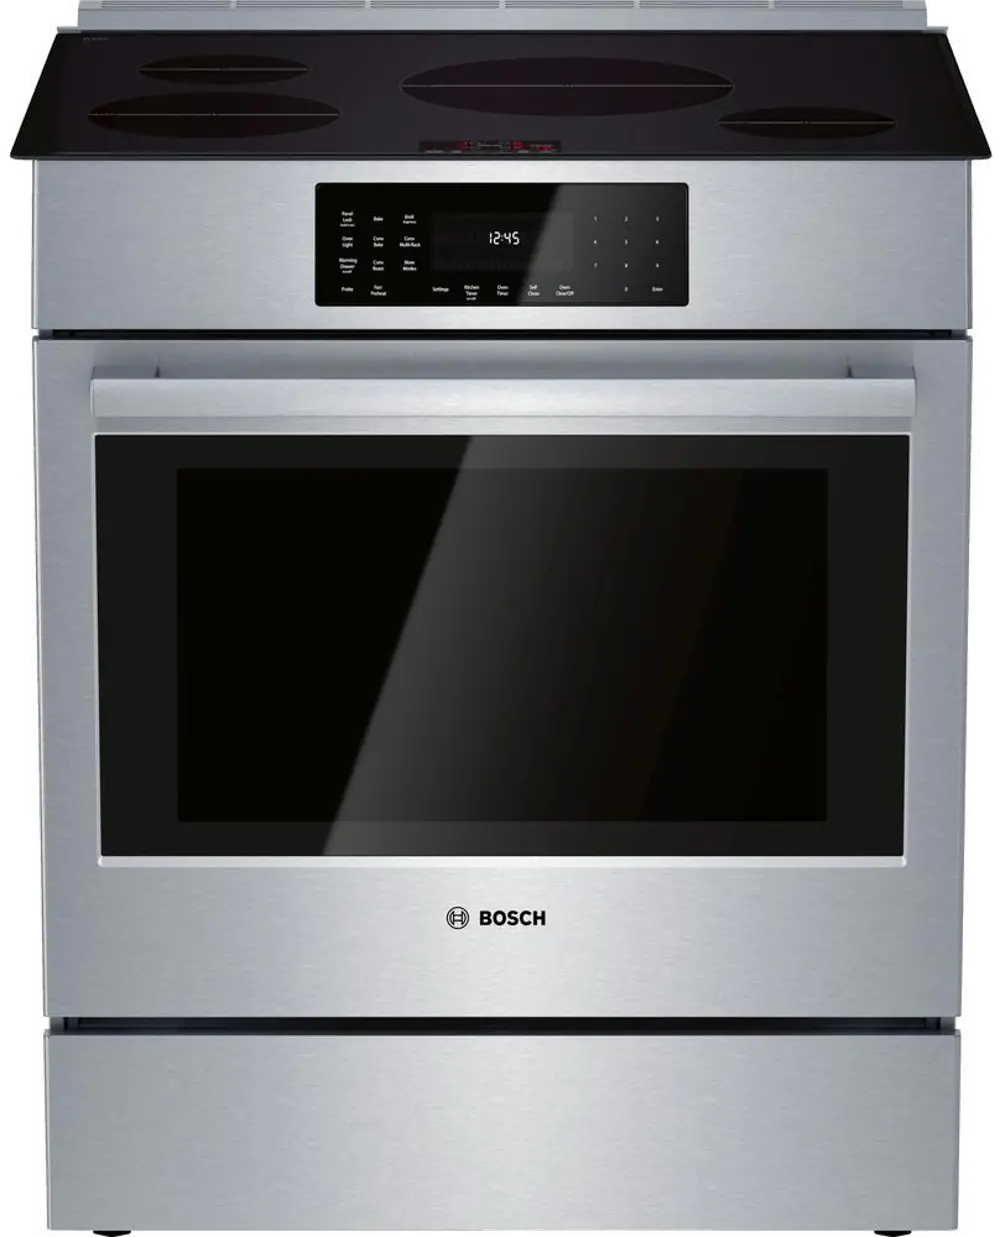 HII8056U Bosch 800 Series 5.4 cu ft Electric Induction Range - Stainless Steel-1